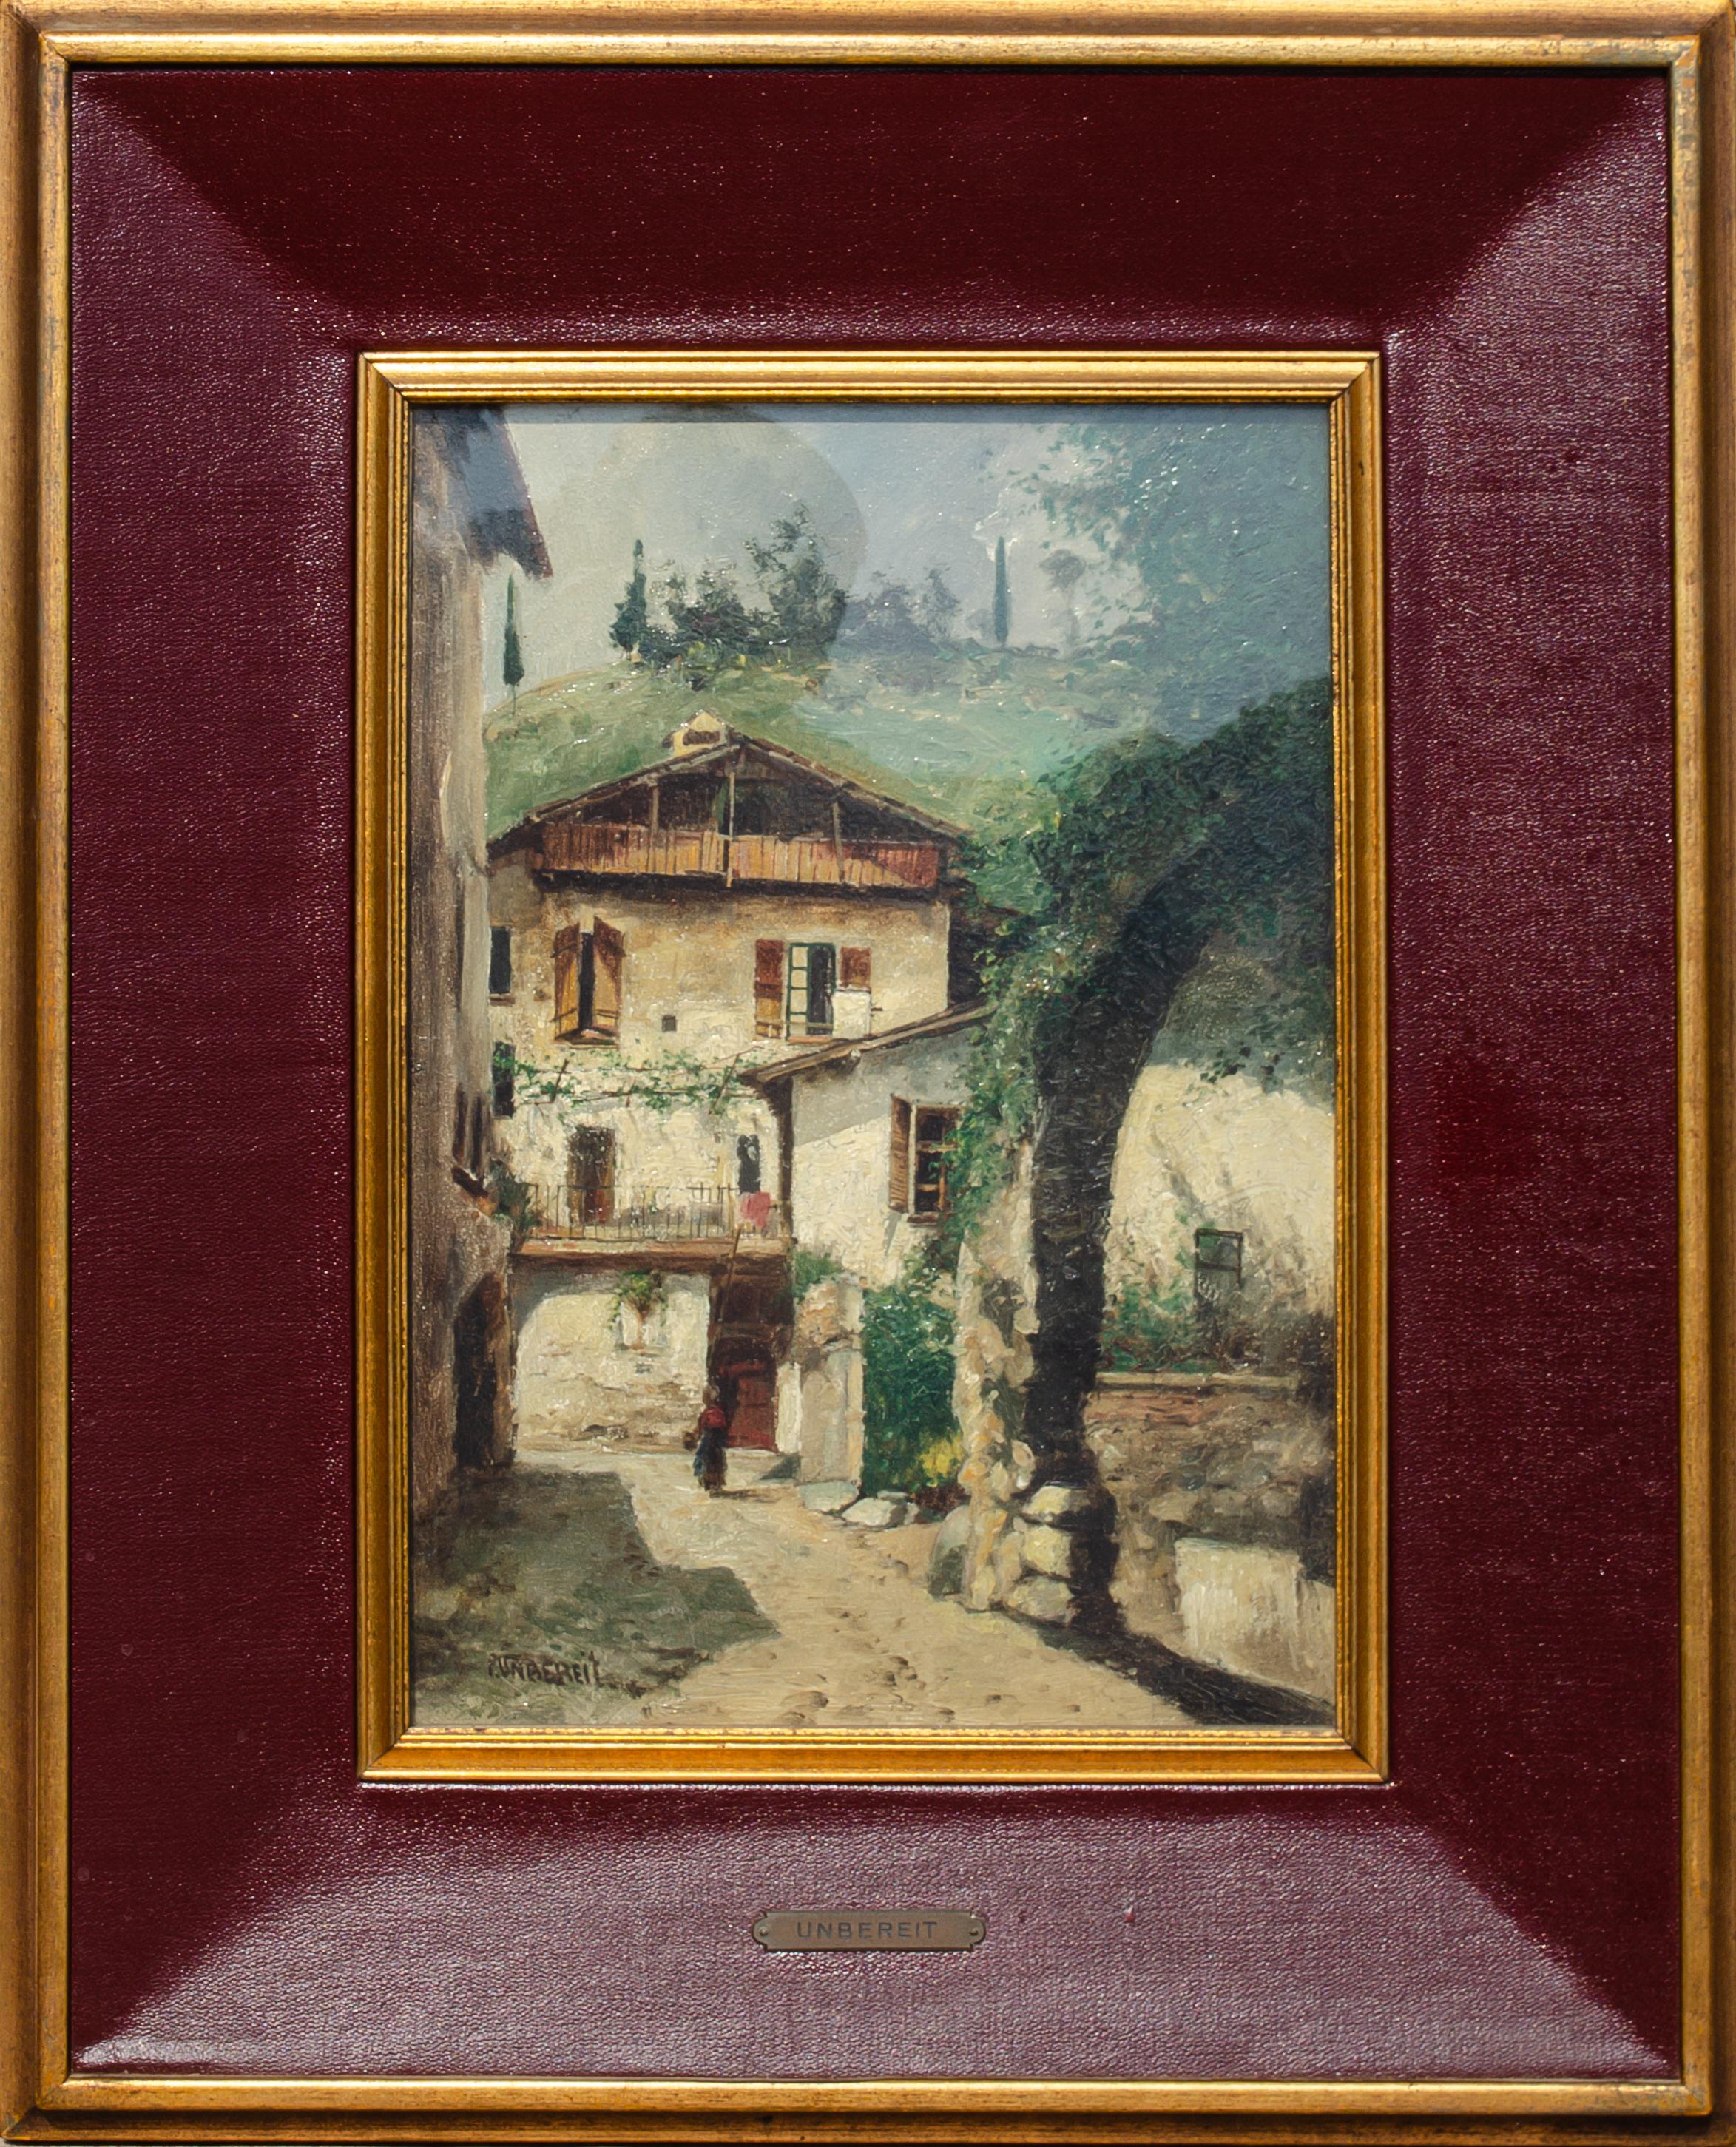 Paul Unbereit (1884-1937)
Untitled, Early 20th Century
Oil on board
Framed: 22 x 17 1/4 x 1 3/8 in.
Signed lower left: P. Unbereit

Paul Unbereit ( 27 January 1884 in Berlin – 18 November 1937 in Vienna ) was a German academic painter and restorer.